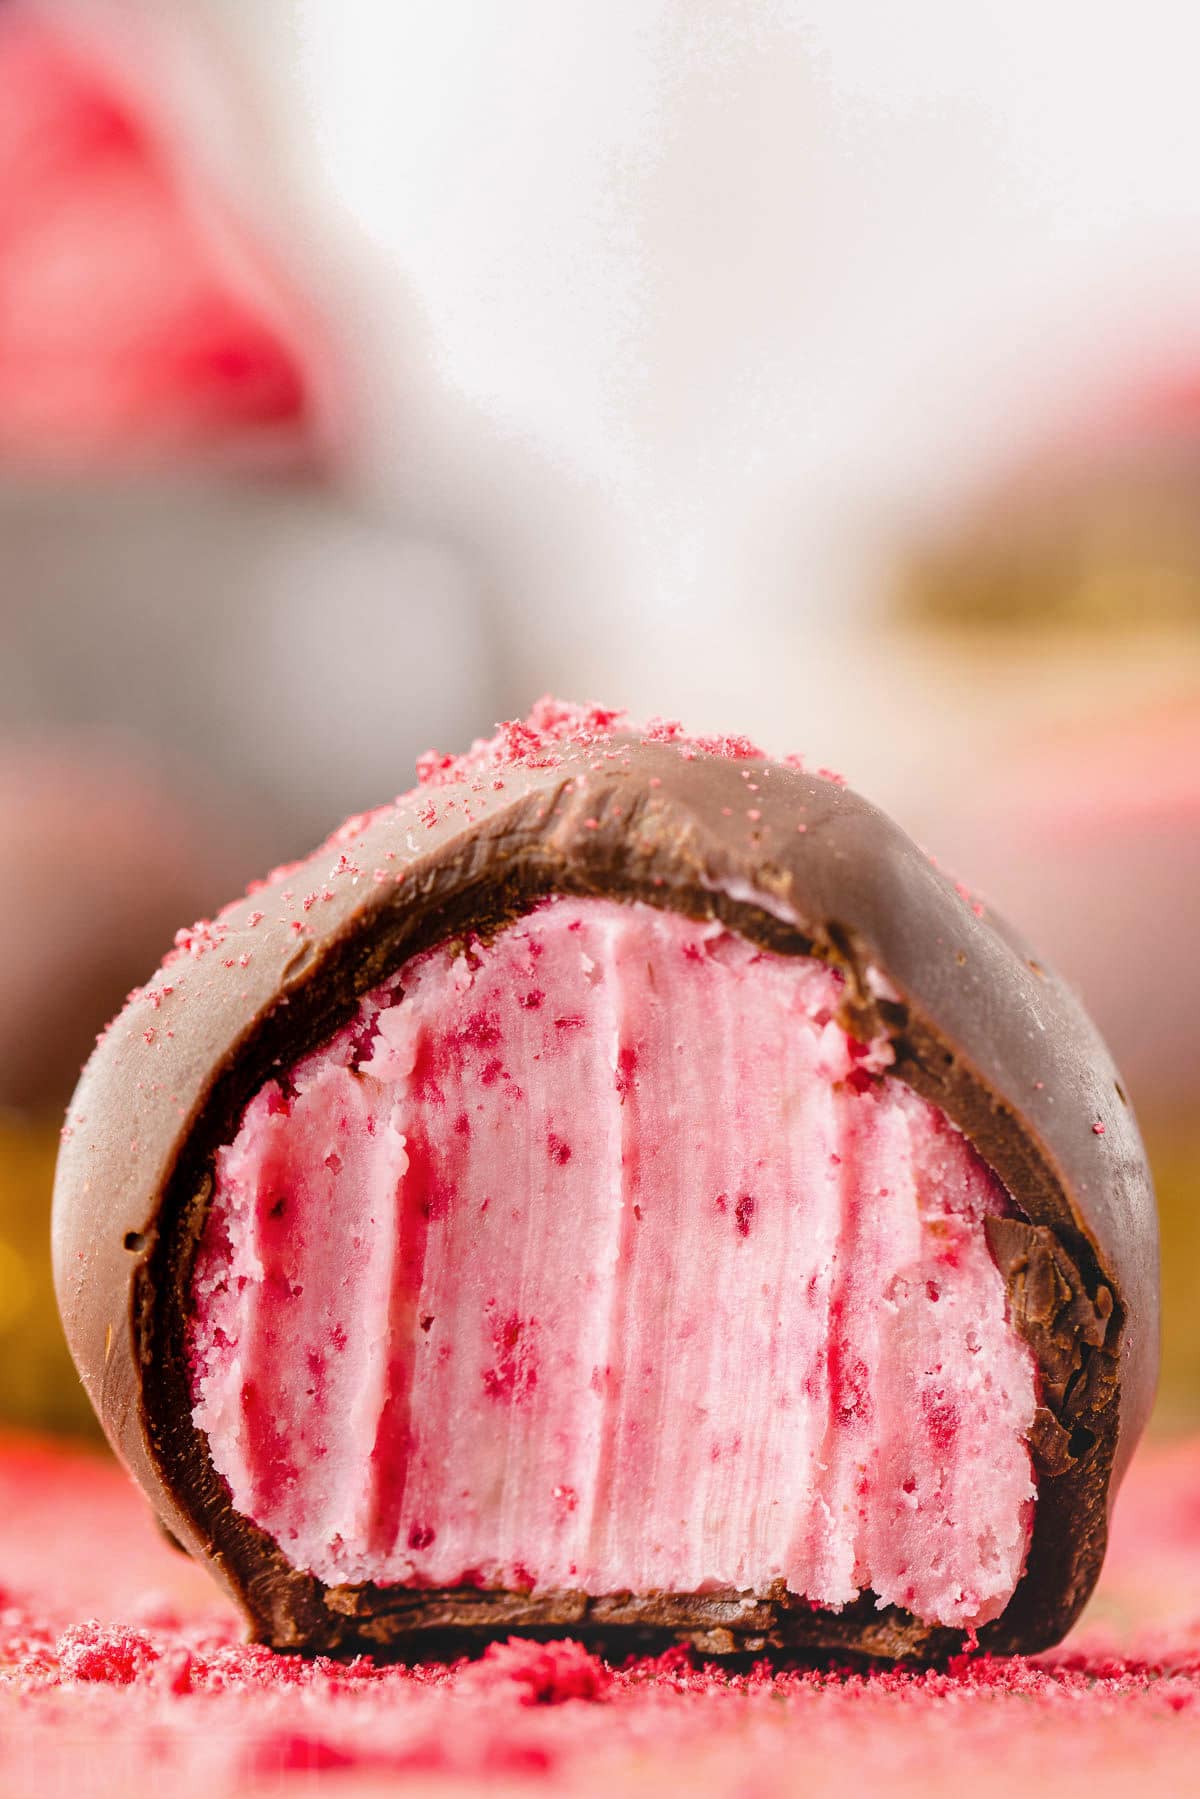 close up look at a single raspberry truffle with a bite taken out of it so you can see the creamy raspberry interior.